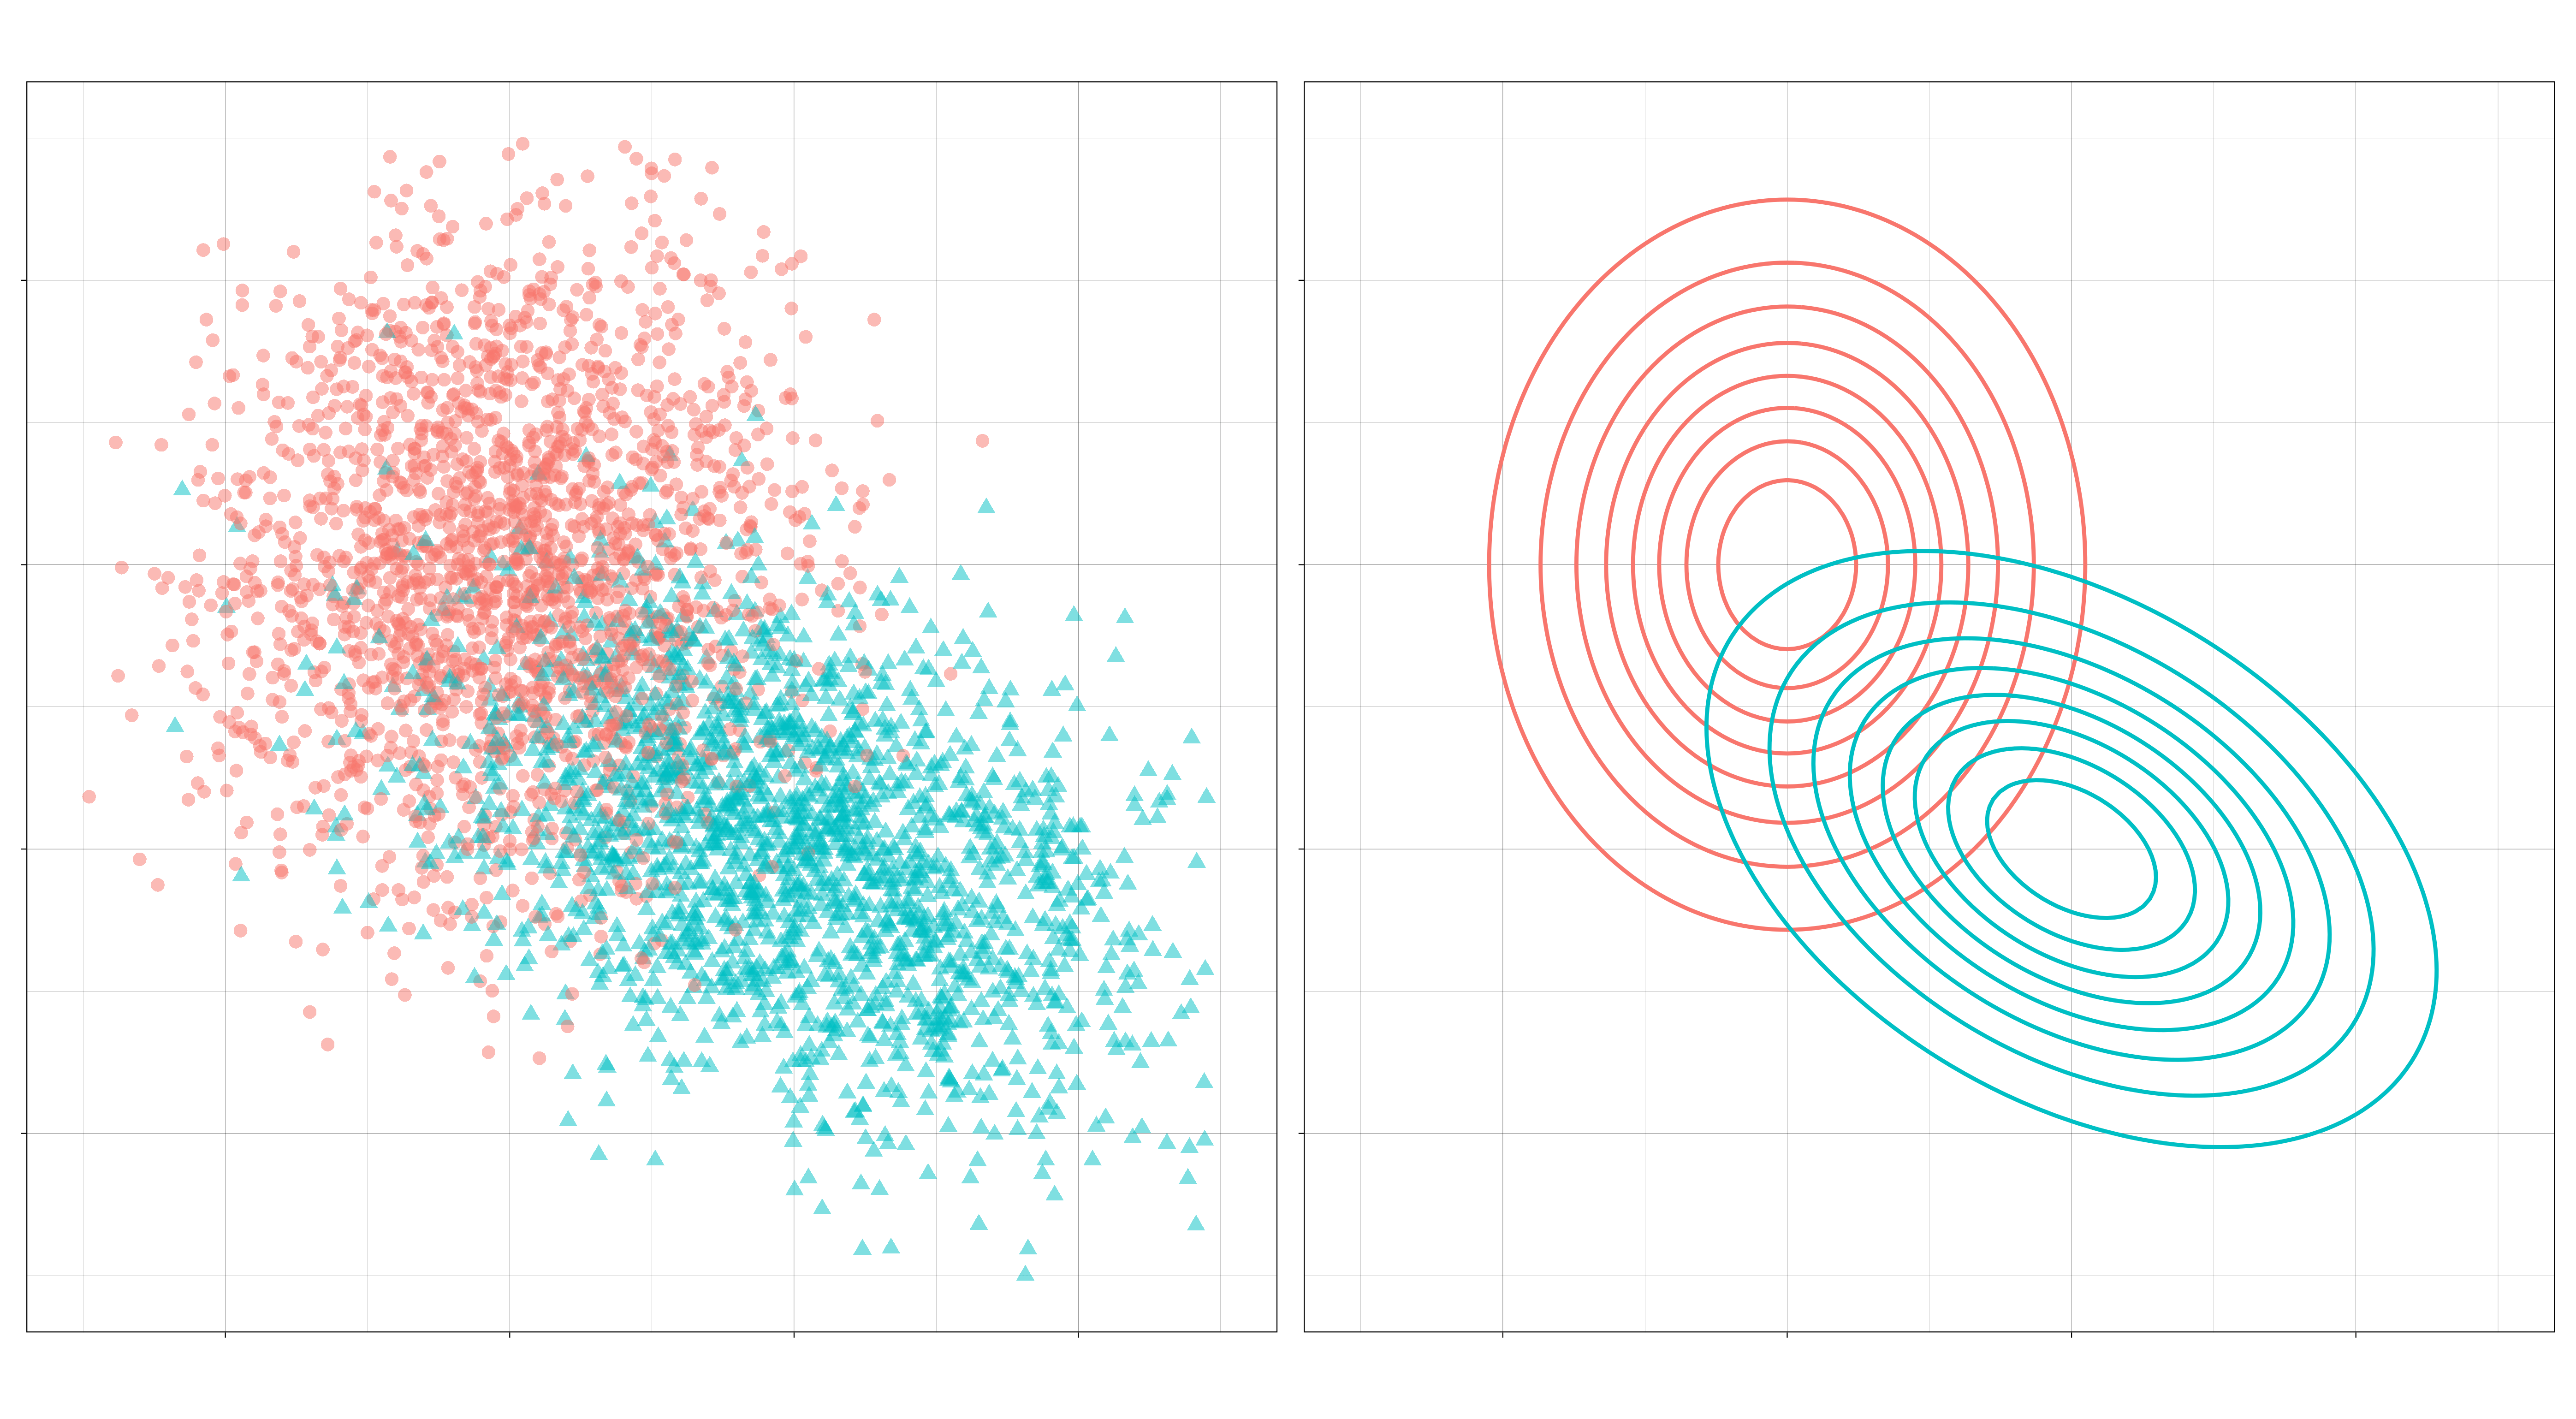 Left: A sample from the feature distributions for the two-class case. Right: Their densities.